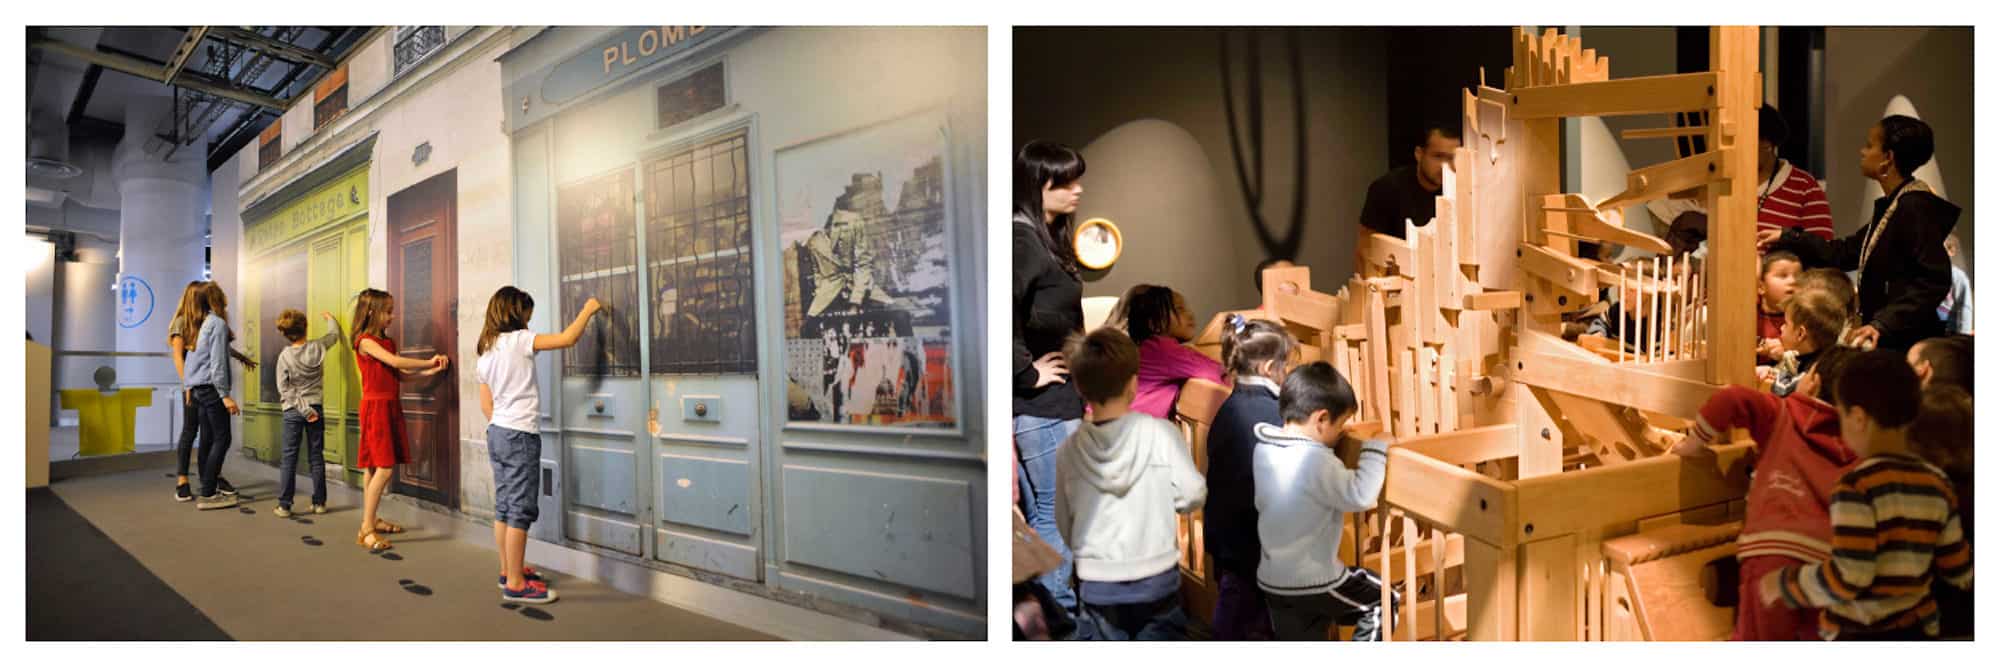 Kids drawing on the walls (left) and exploring the interactive exhibits (right) at Paris' Science Museum. 